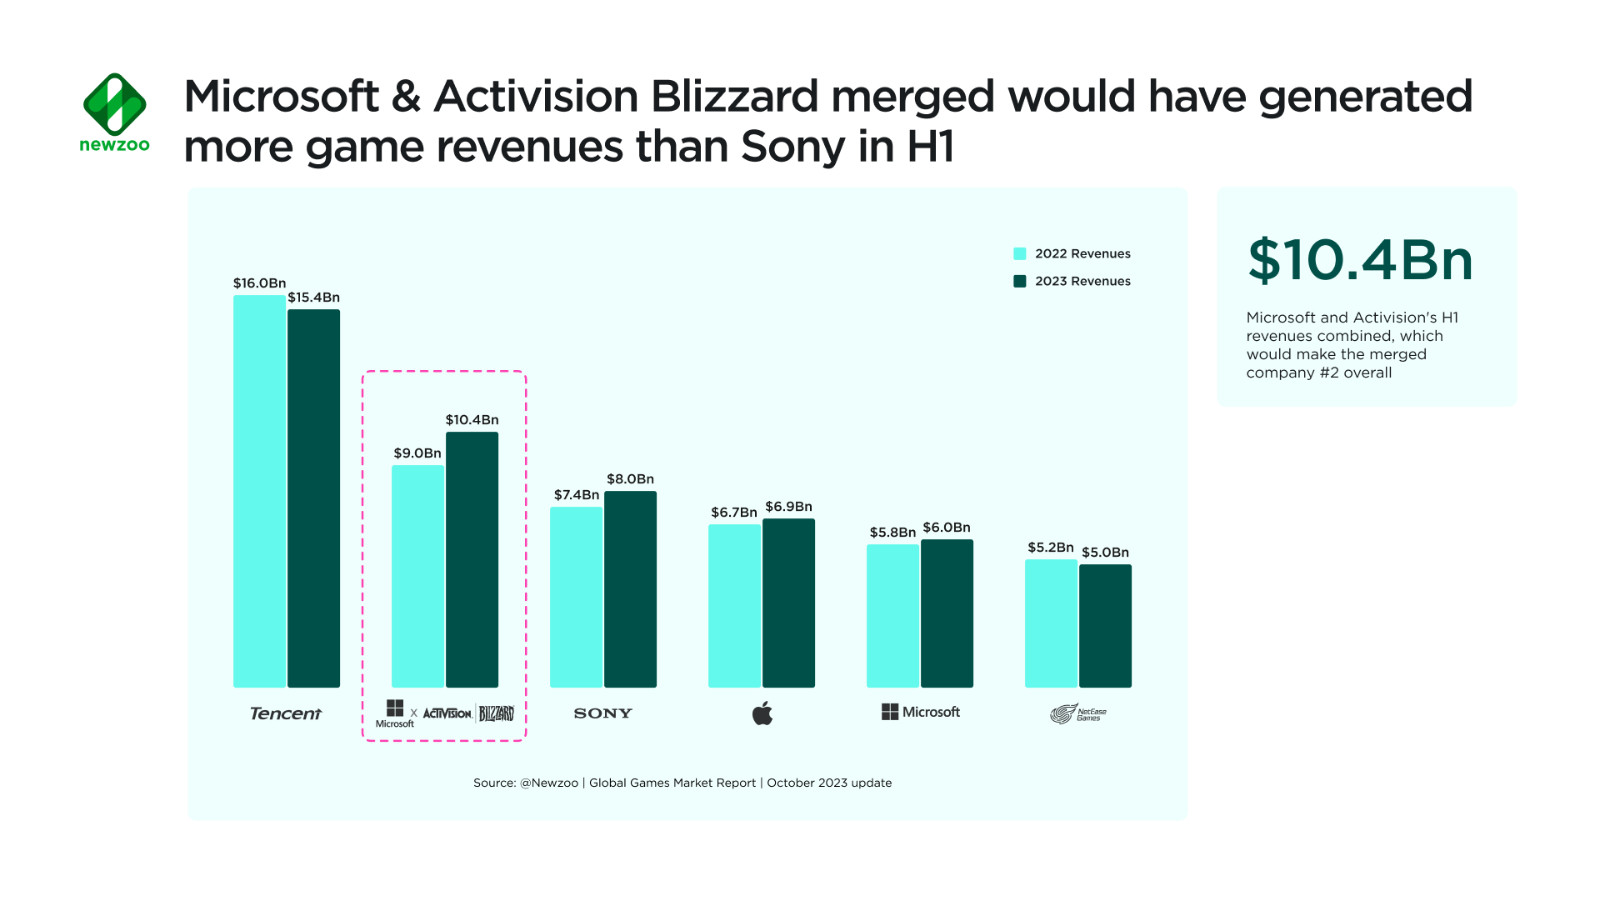 Microsoft-and-Activision-Blizzard-merged-would-have-generated-more-game-revenues-than-Sony-in-H1-2